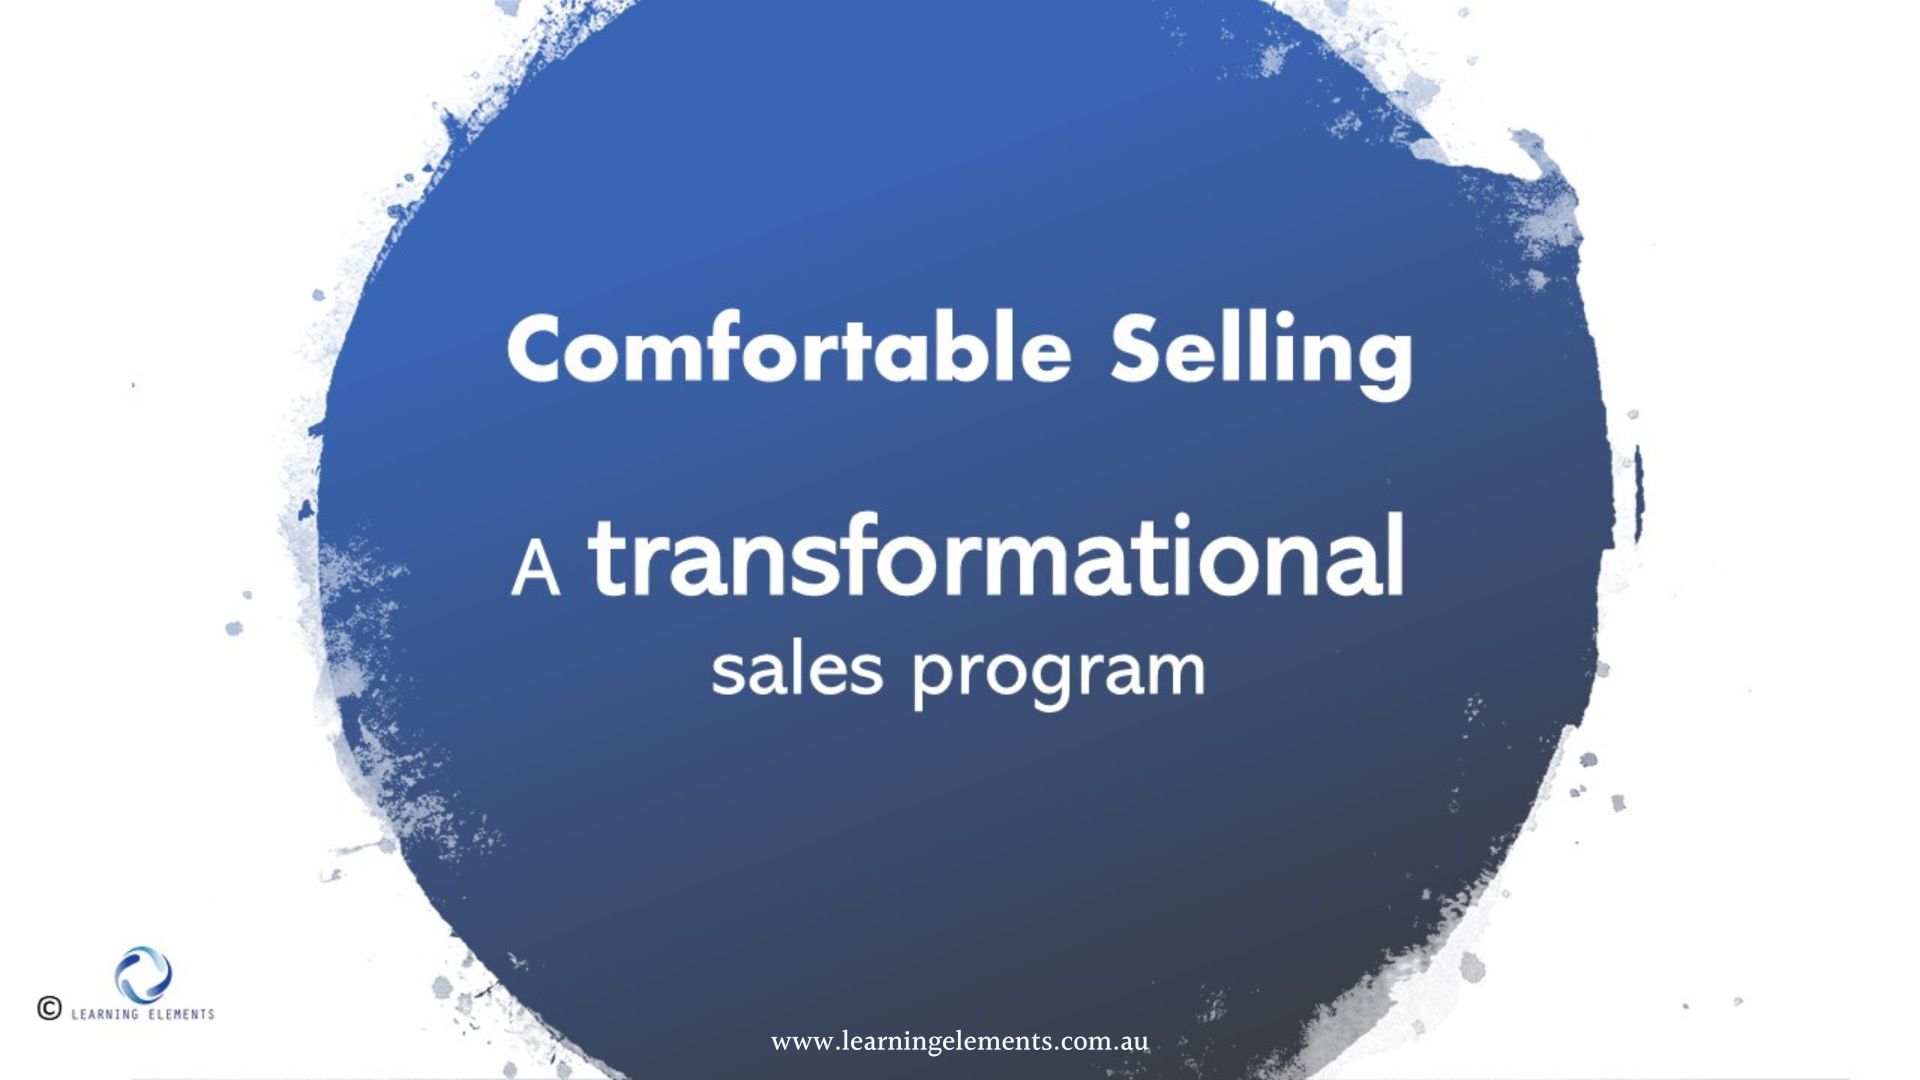 Comfortable Selling Online Training - Introductory Transformational Sales Program